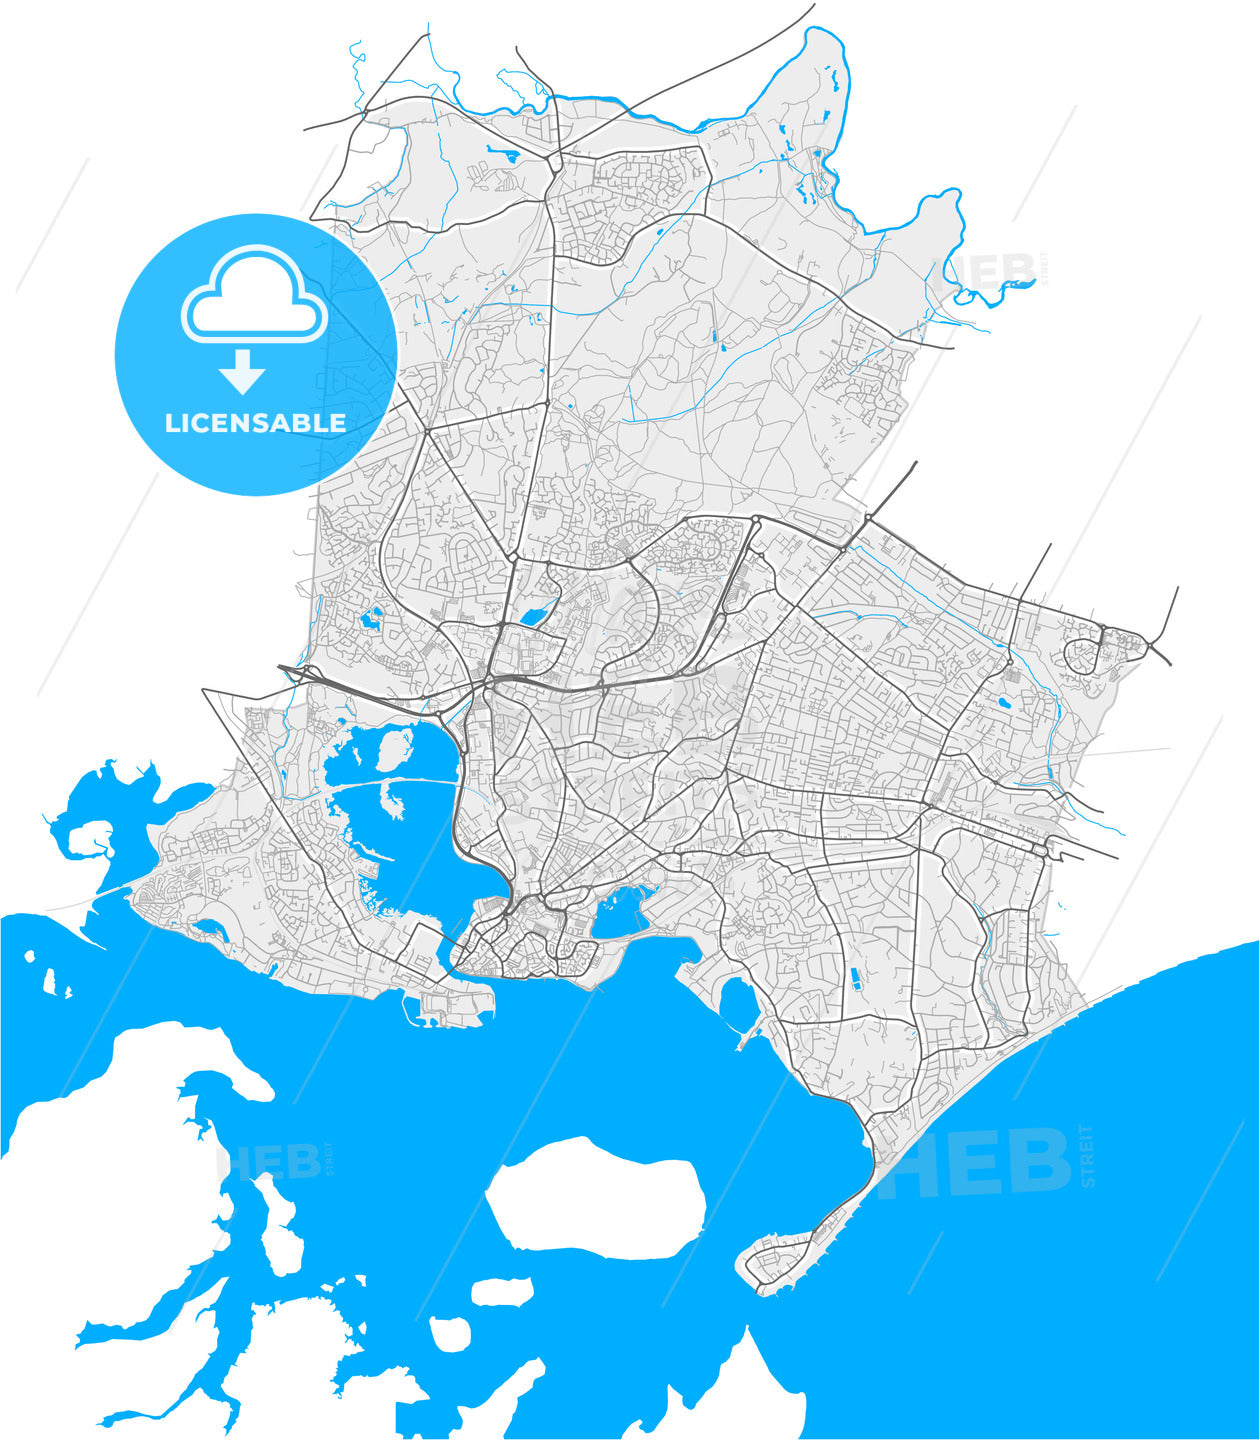 Poole, South West England, England, high quality vector map